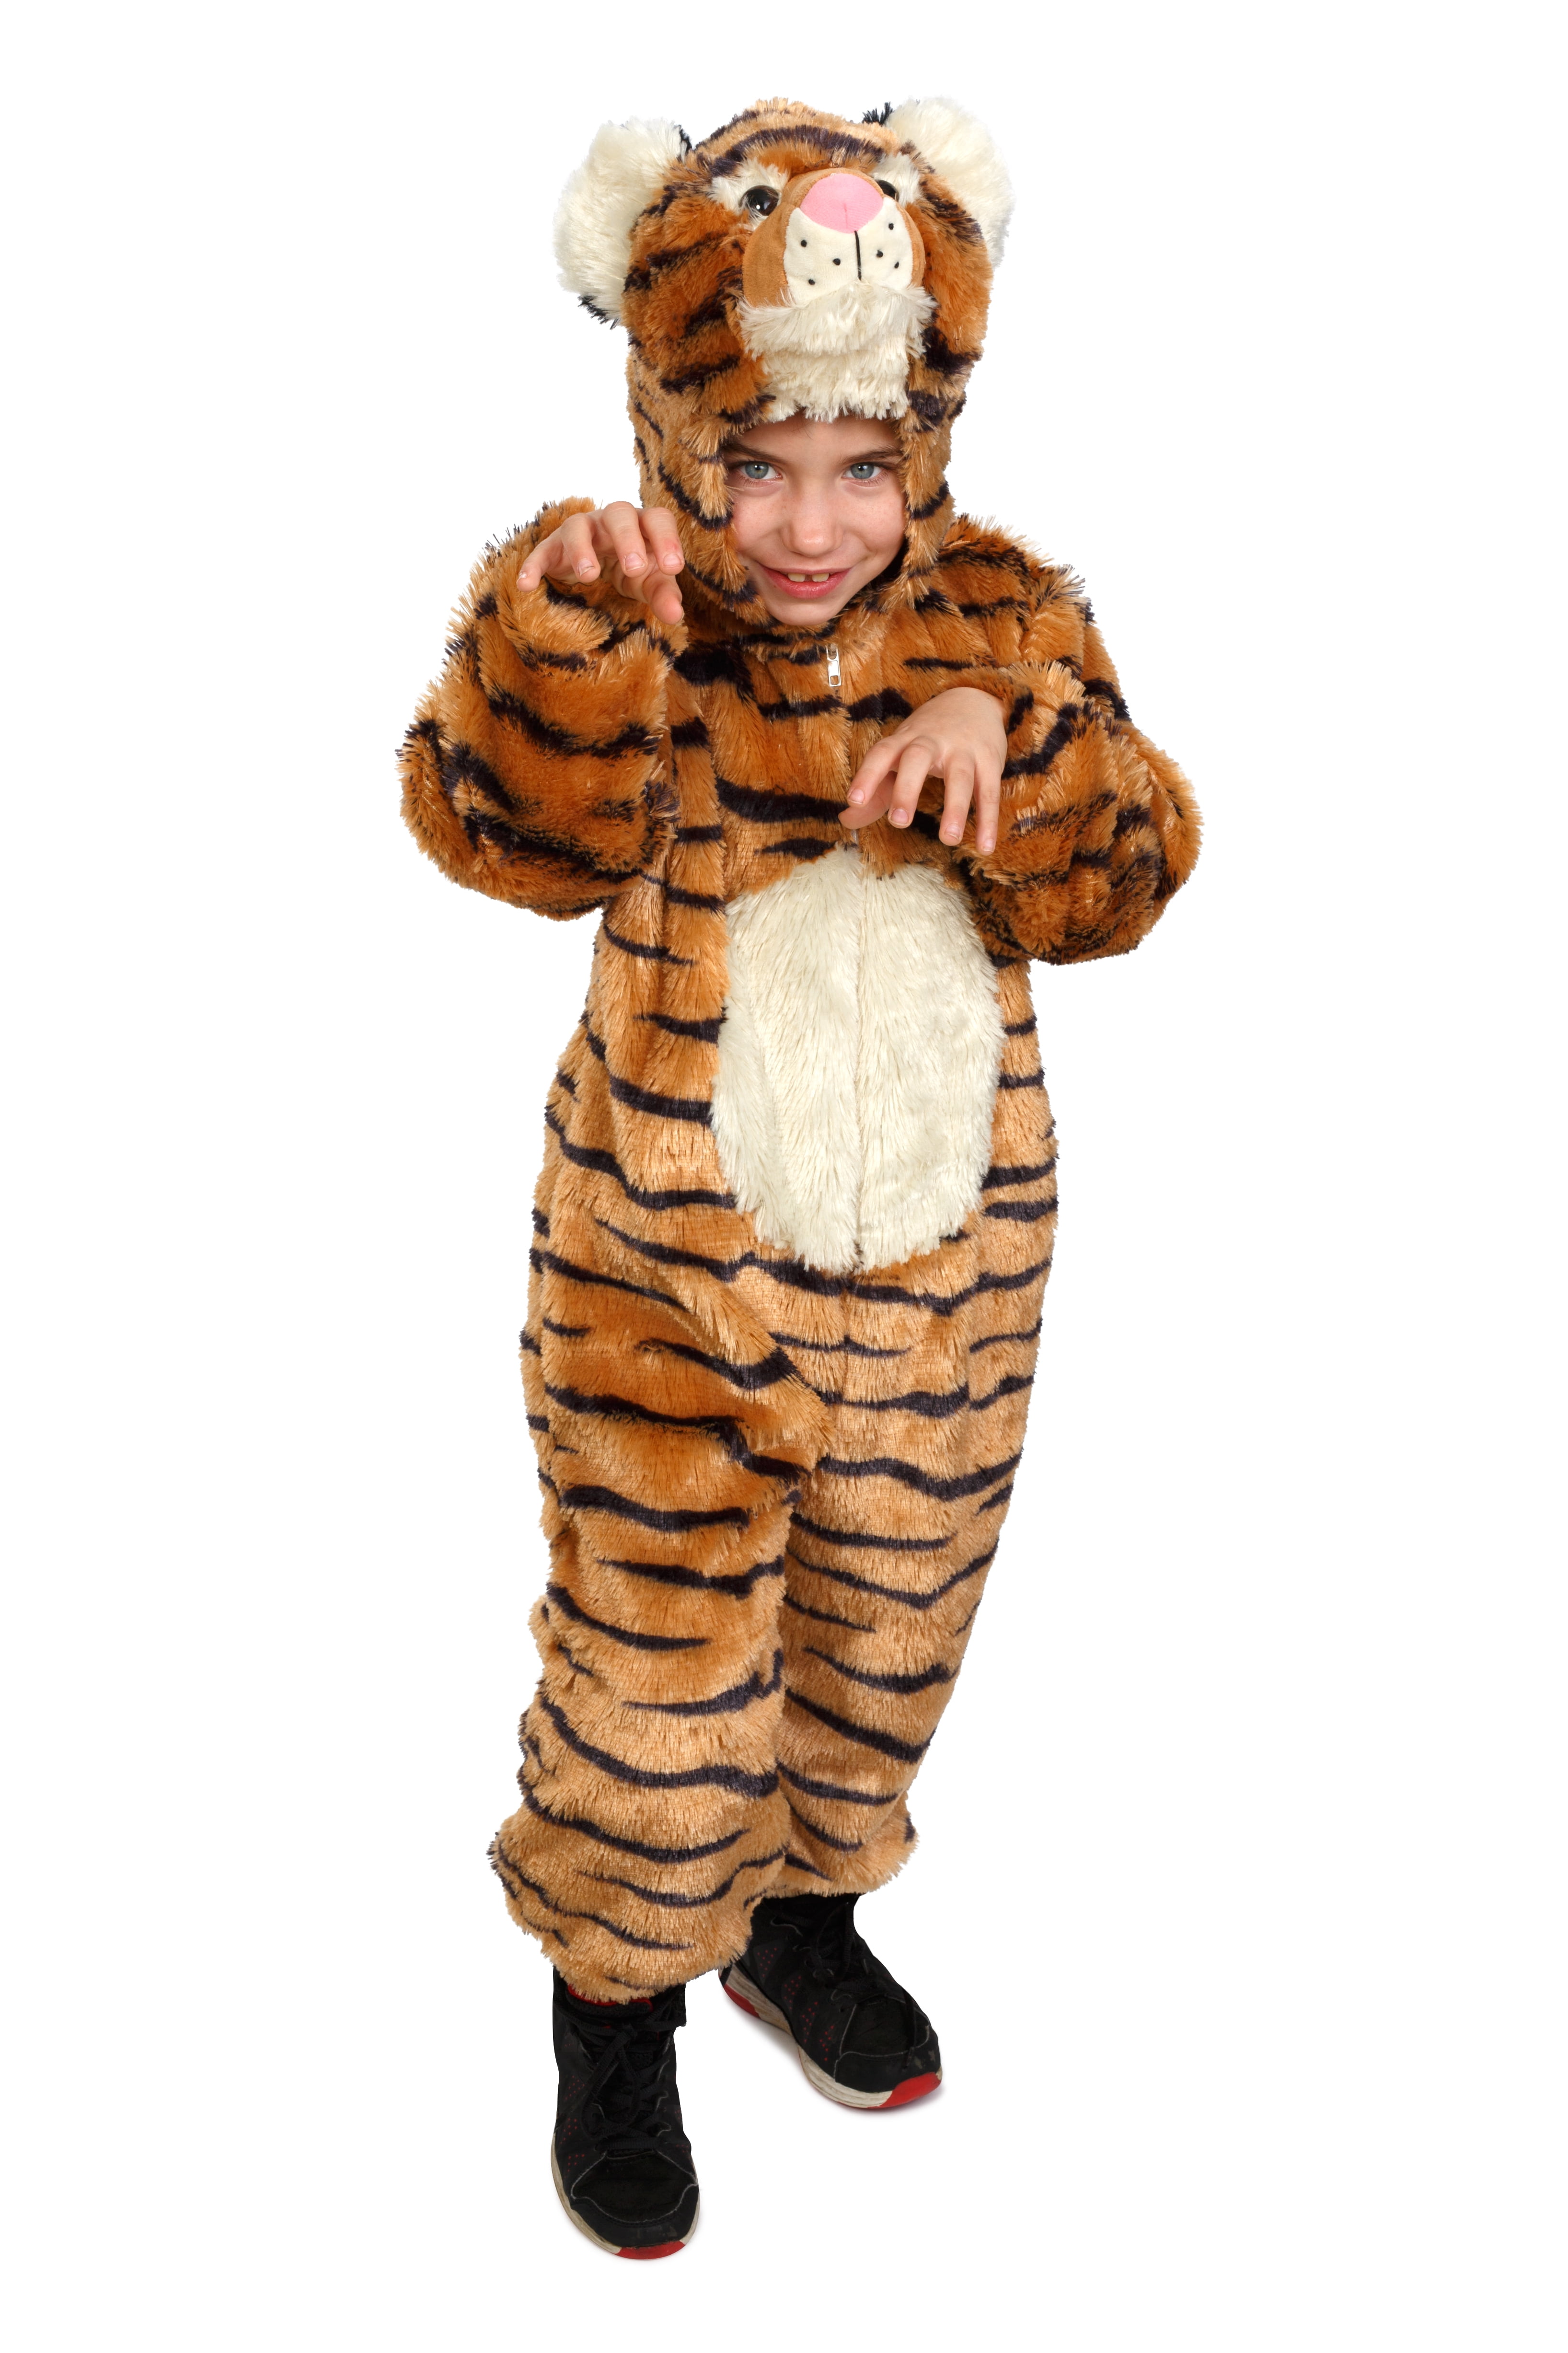 Picture of Dress Up America 864-M Striped Tiger Costume for 8 to 10 Years Kids, Medium